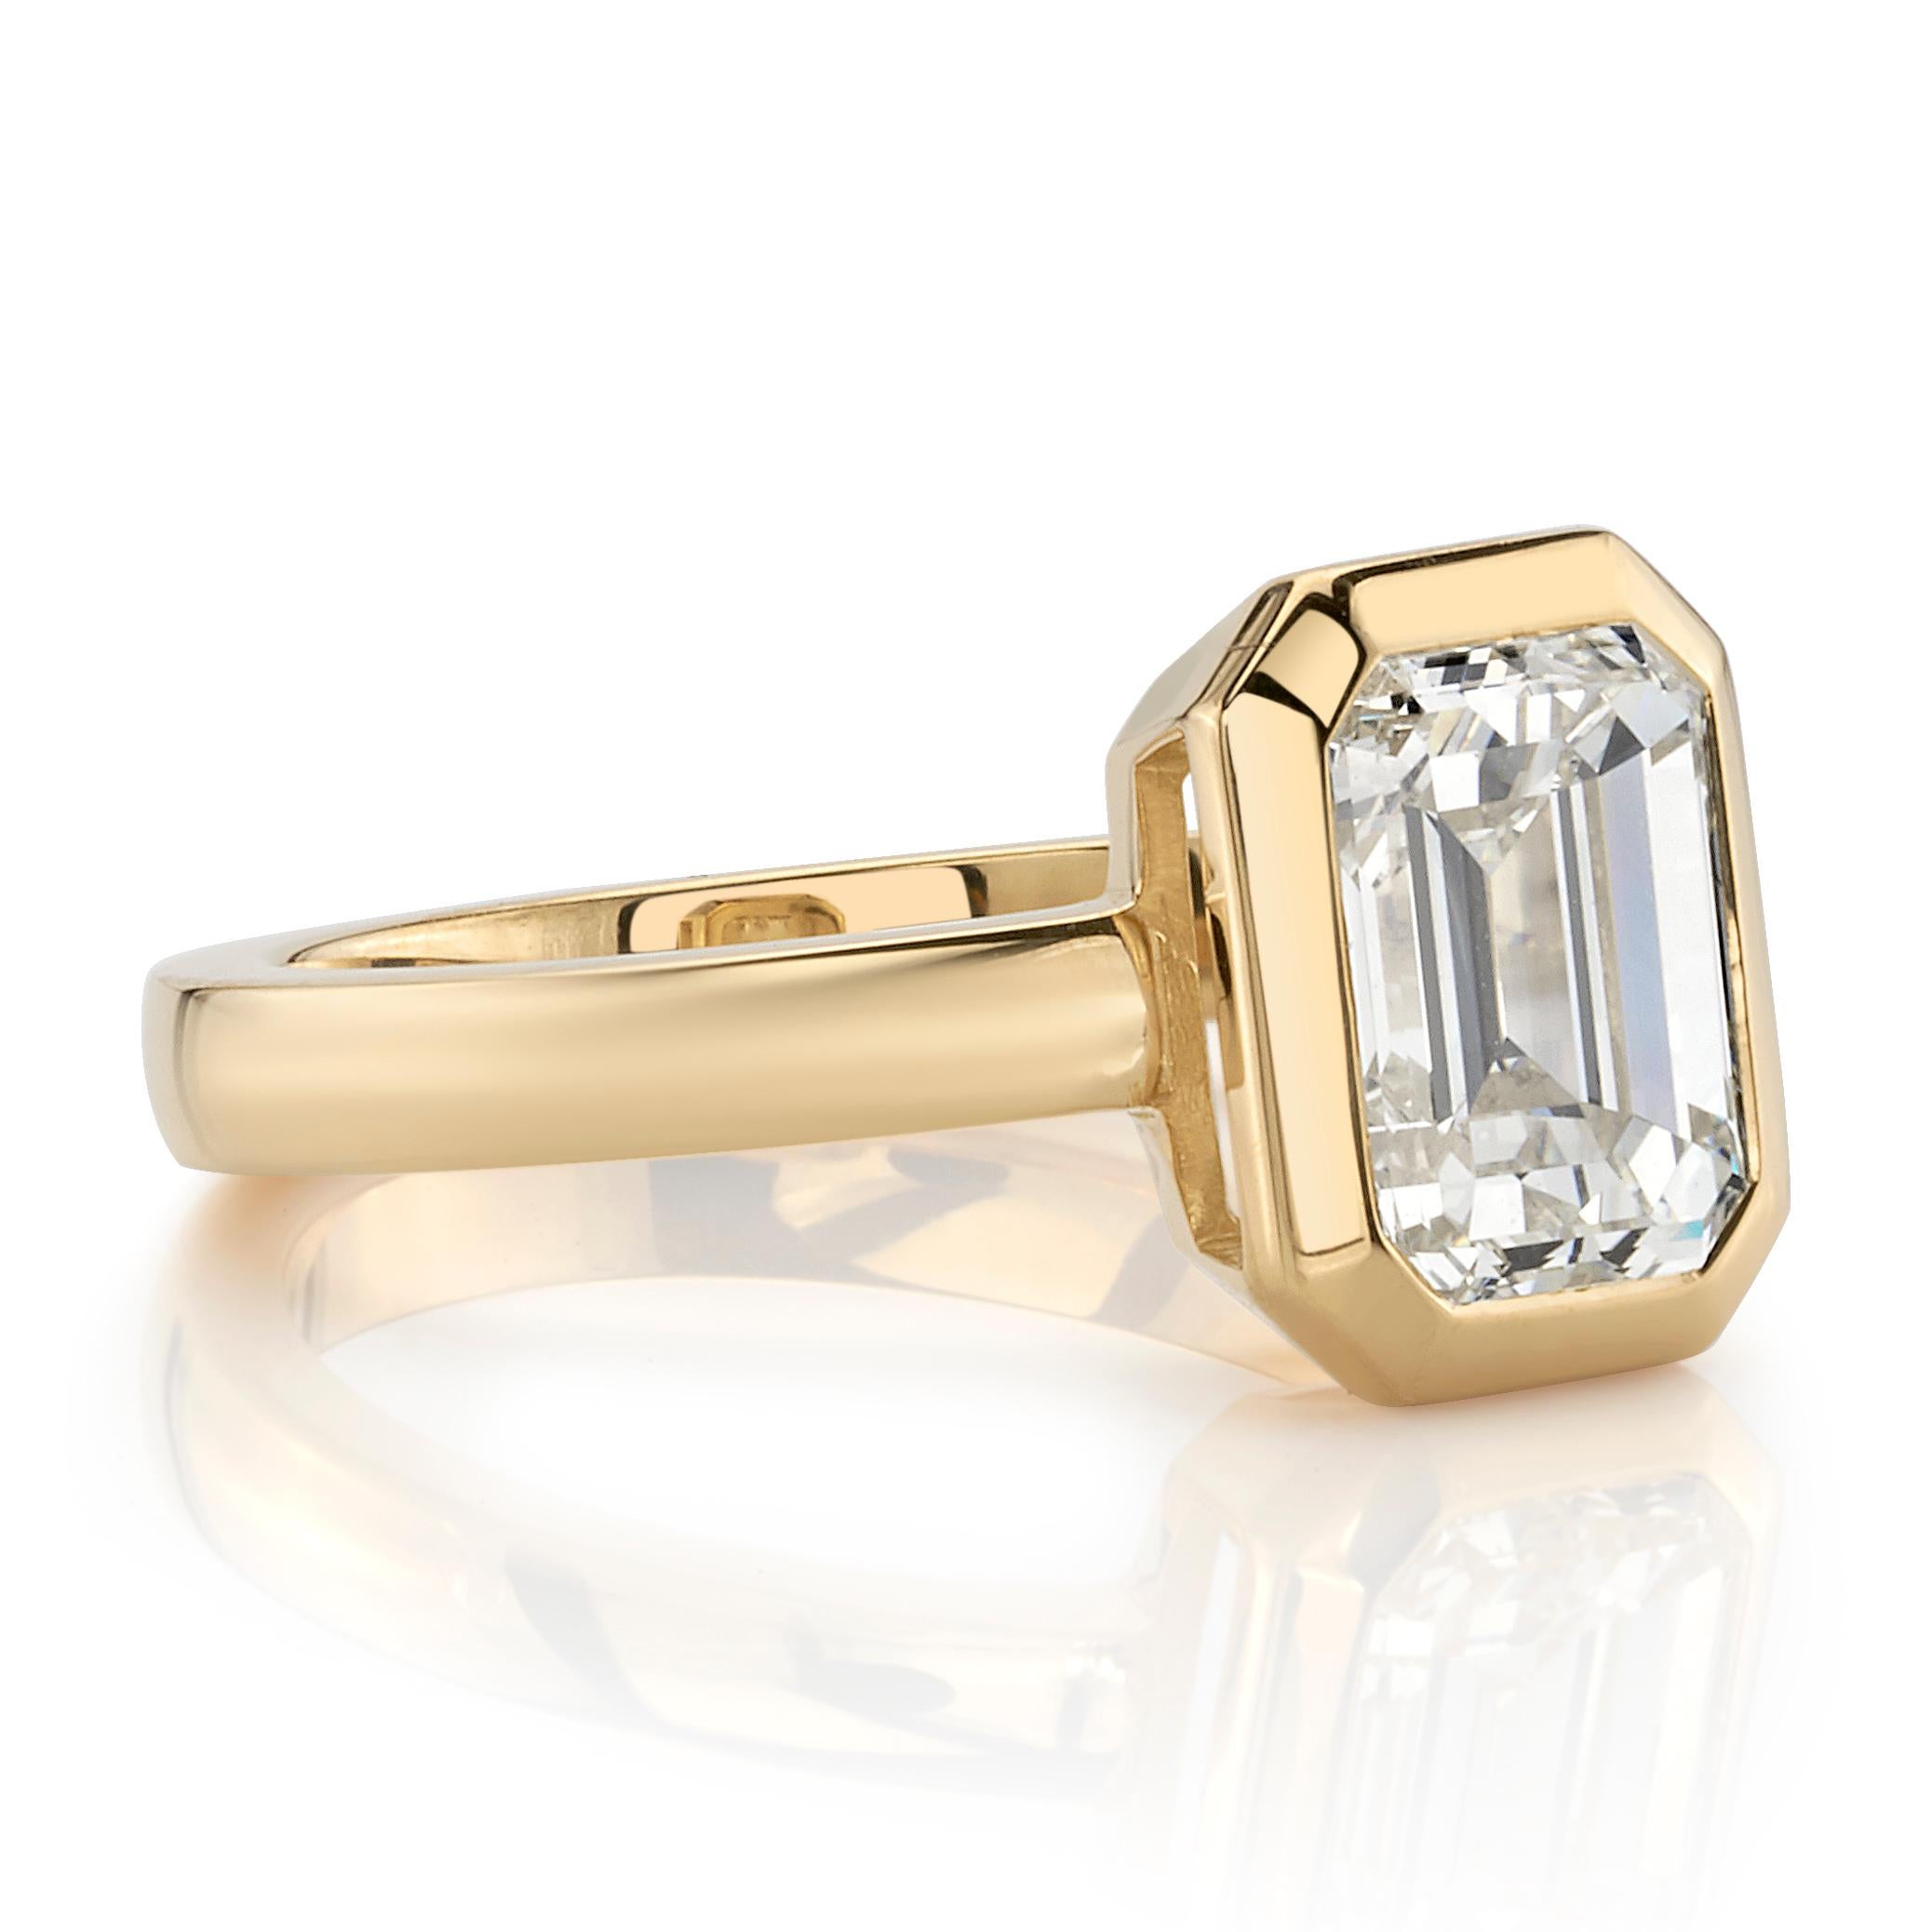 2.03ct N/VS1 GIA certified emerald cut diamond bezel set in a handcrafted 18K yellow gold mounting.